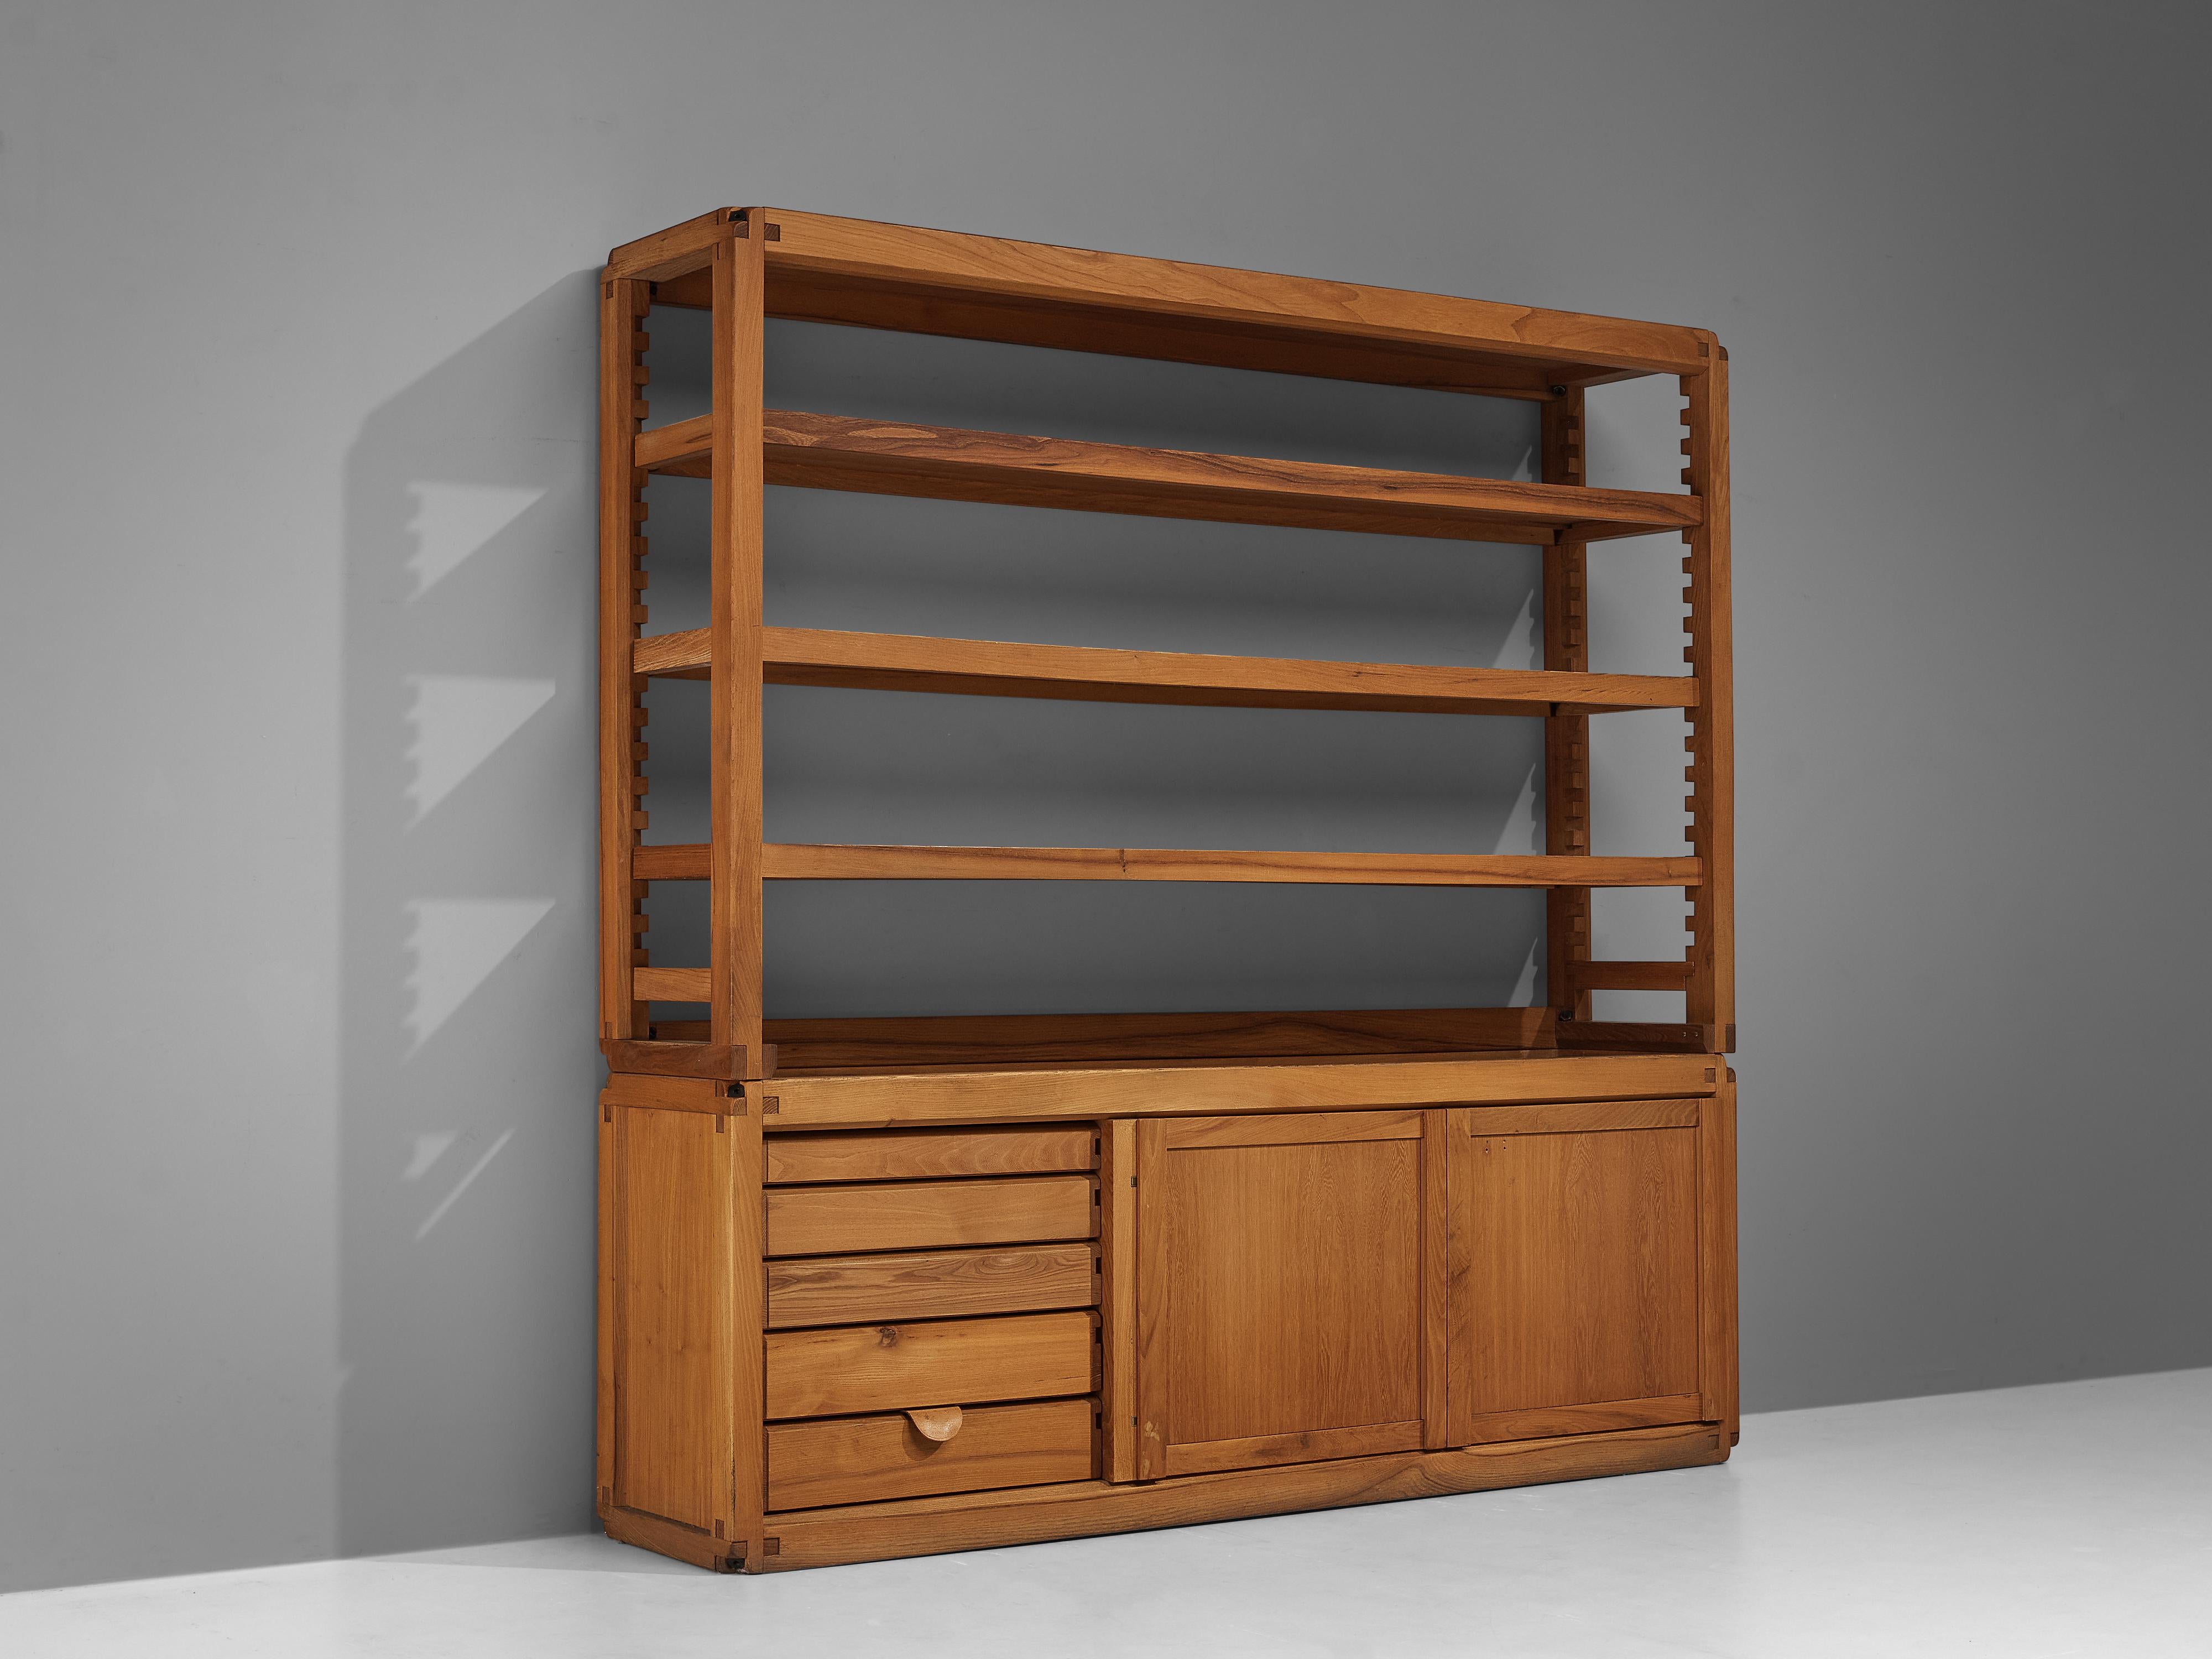 Pierre Chapo, bookcase model 'B10', elm, France, 1960s

This is a versatile shelf model 'B10' designed by Pierre Chapo. The shelving system was created in the 1960s. This robust and solid bookcase consists of a closed compartment with drawers and